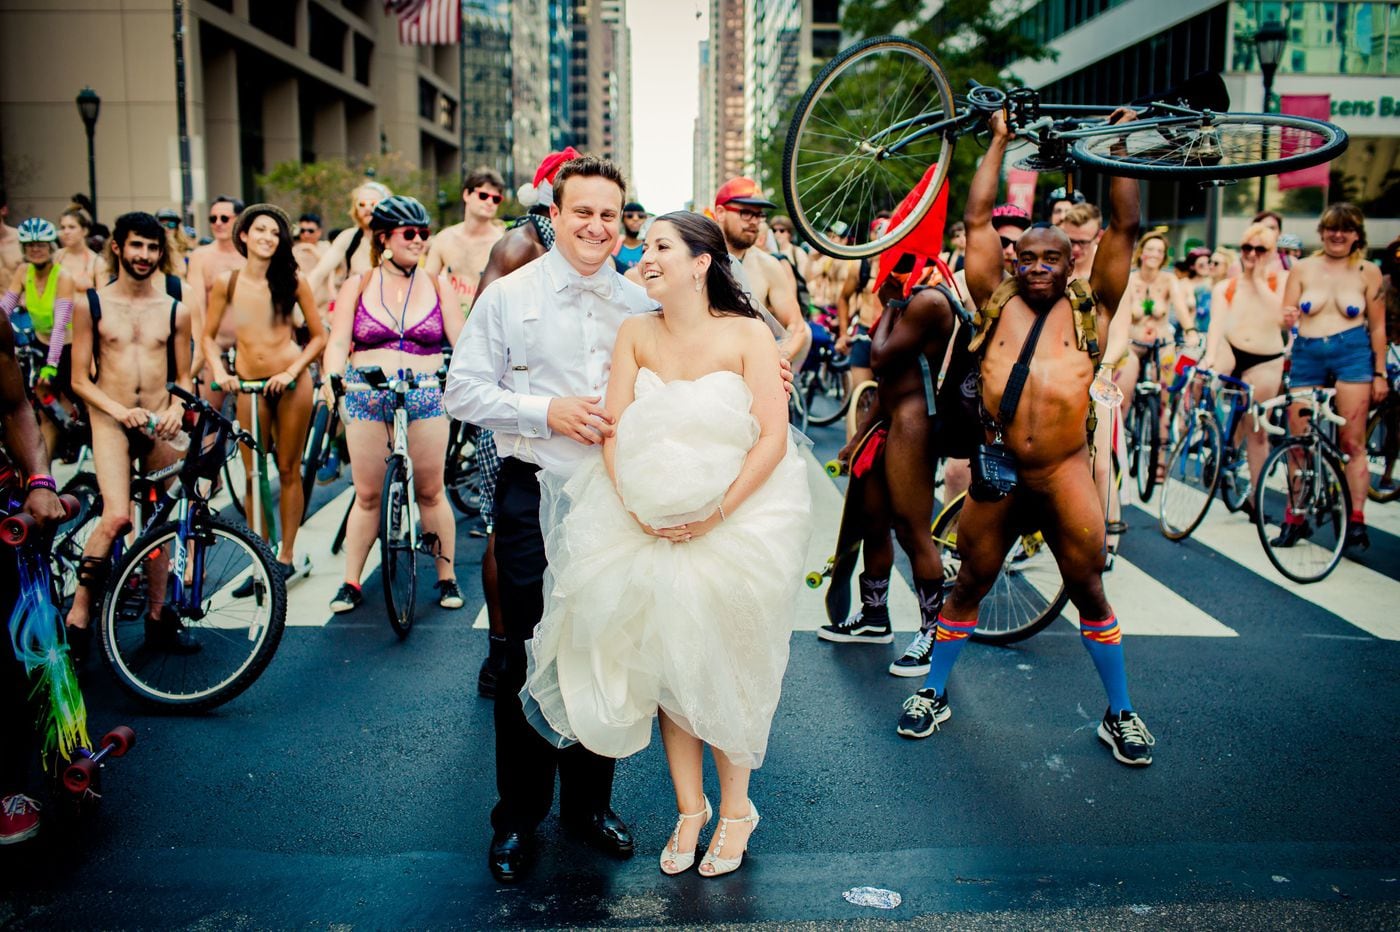 Married Nudist Couples Nude Photo - Photobombing the Naked Bike Ride is Philly's new wedding ...